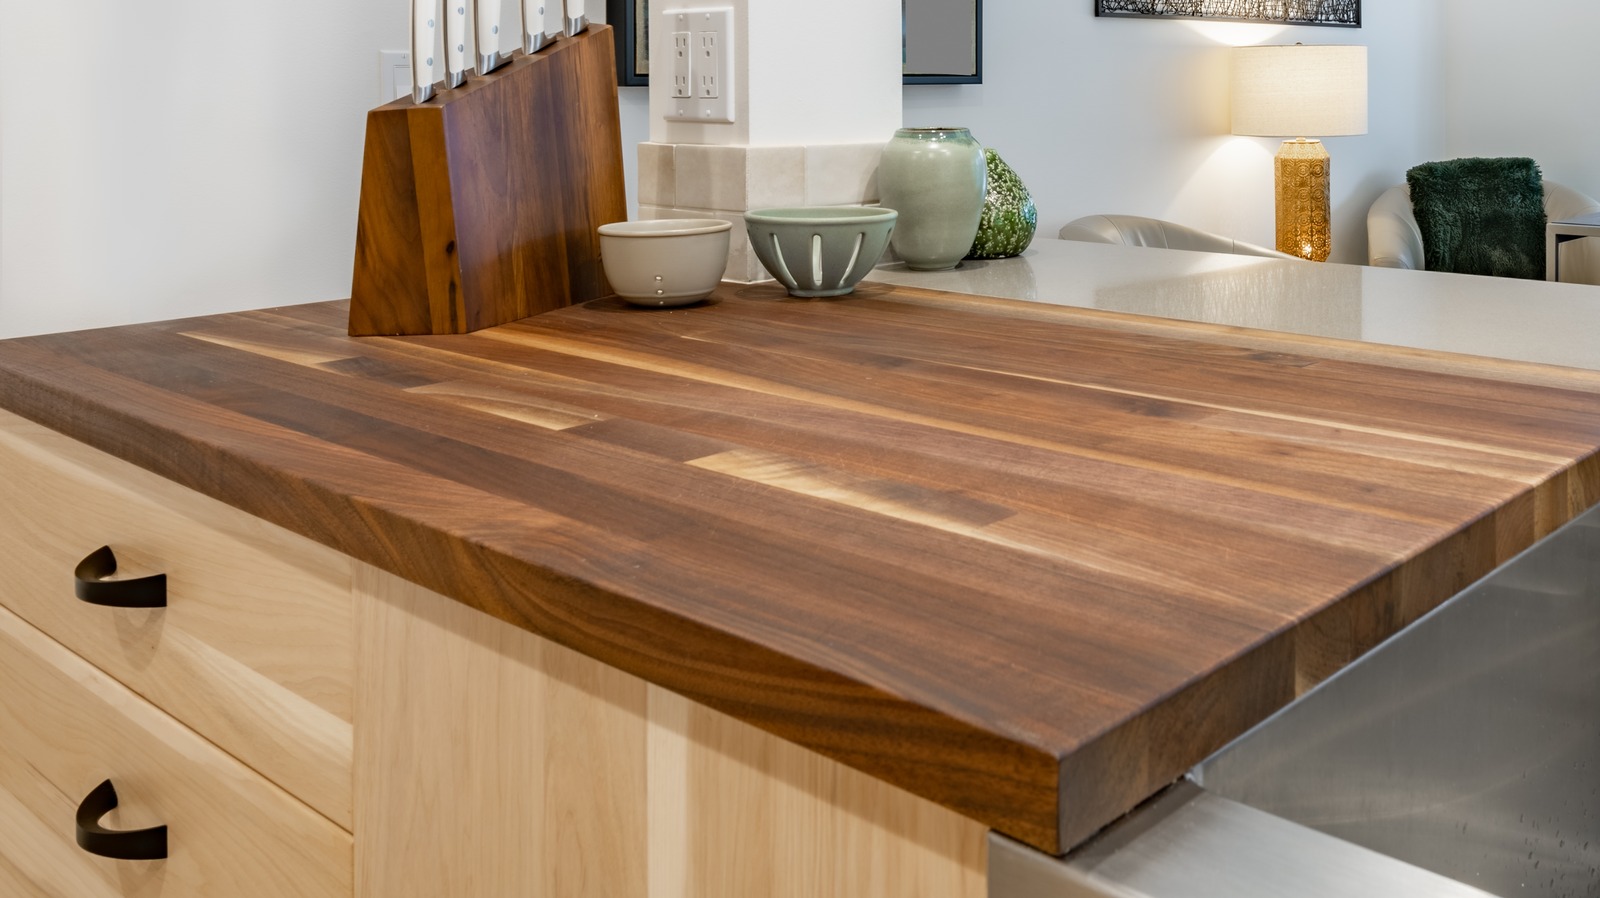 https://www.housedigest.com/img/gallery/should-you-attempt-to-diy-install-butcher-block-countertops/l-intro-1695053579.jpg